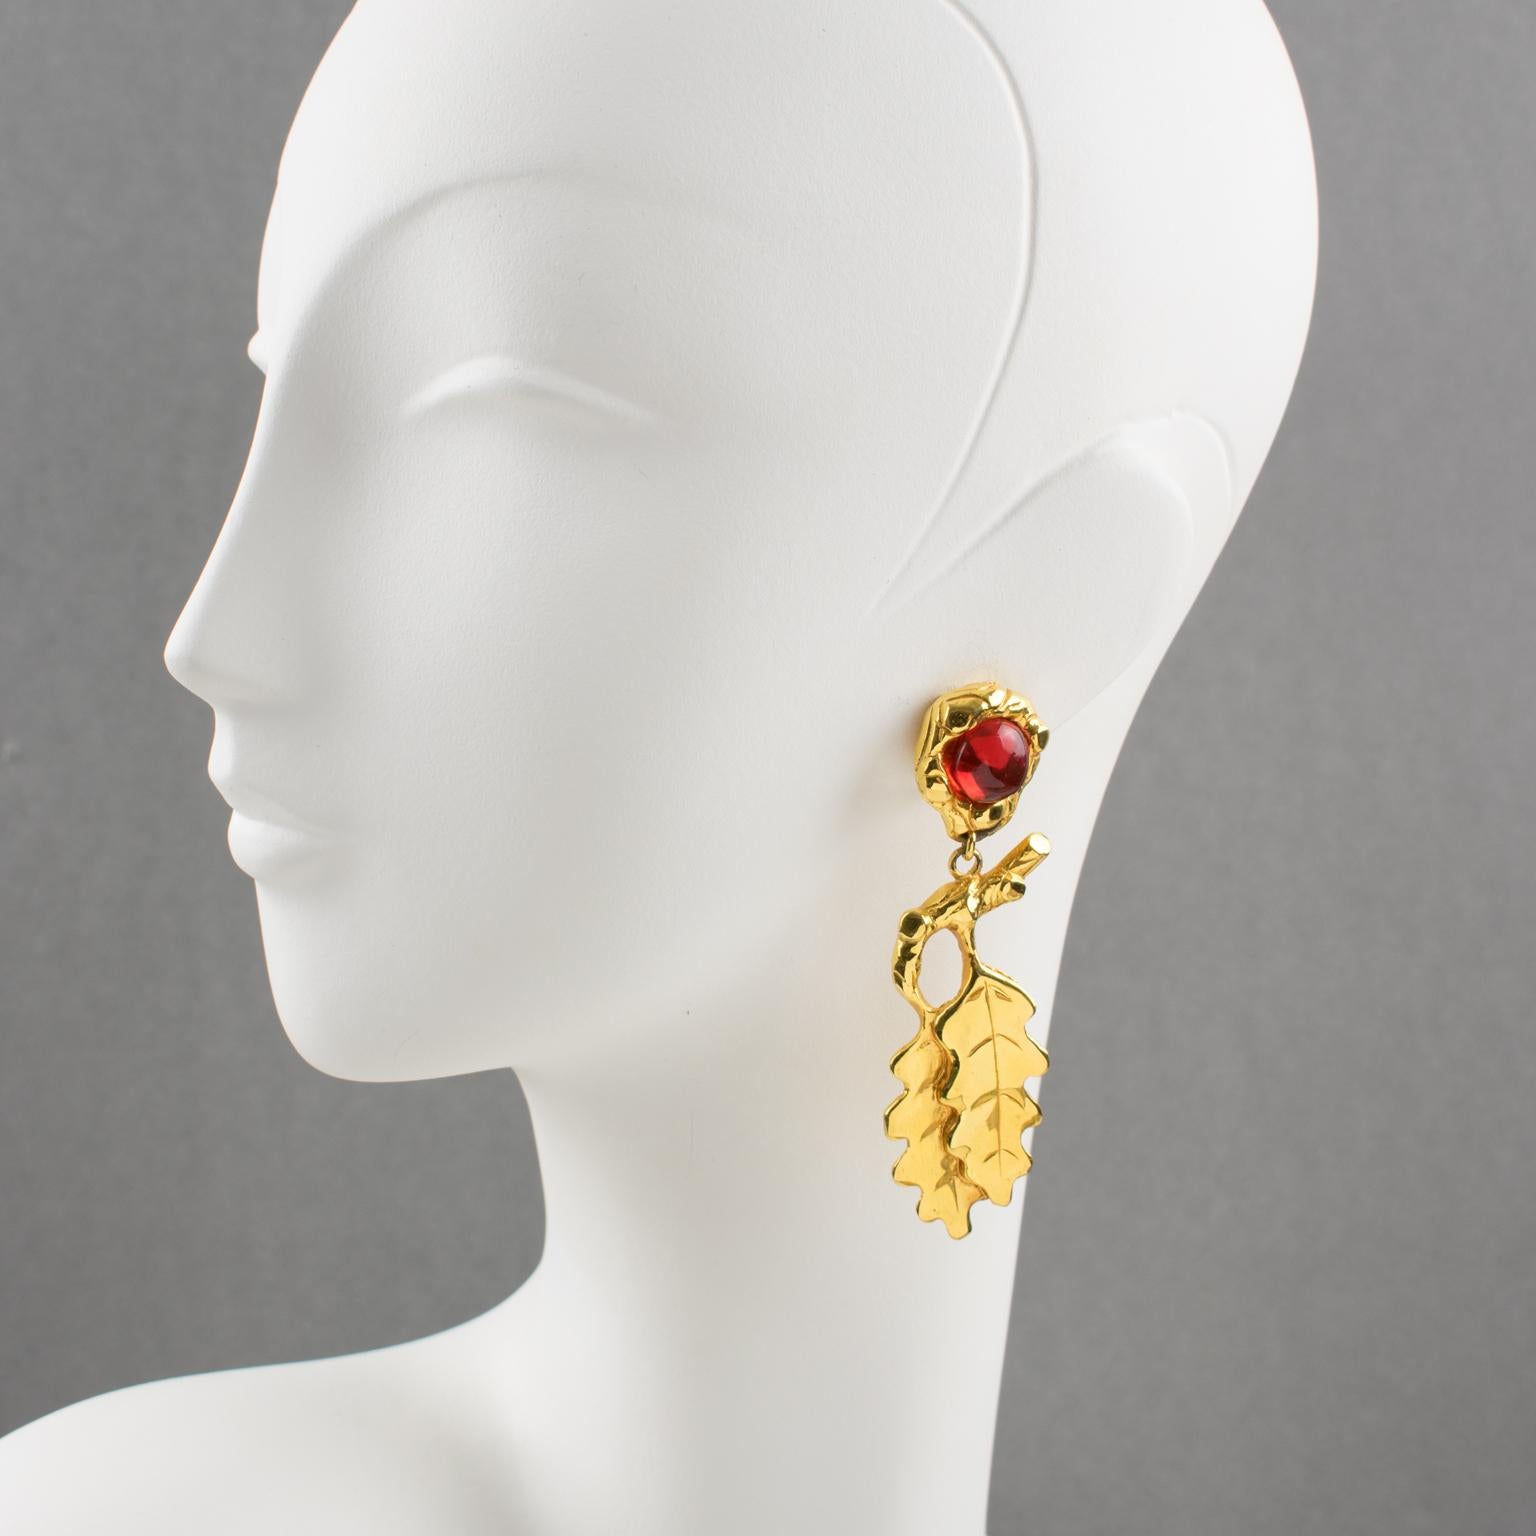 Oversized clip-on earrings by Ines de la Fressange Paris. Dangling shape, with gilt metal all carved and textured featuring oak leaves compliment with amber resin cabochon. Signed underside with Ines de la Fressange gilt logo tag: 